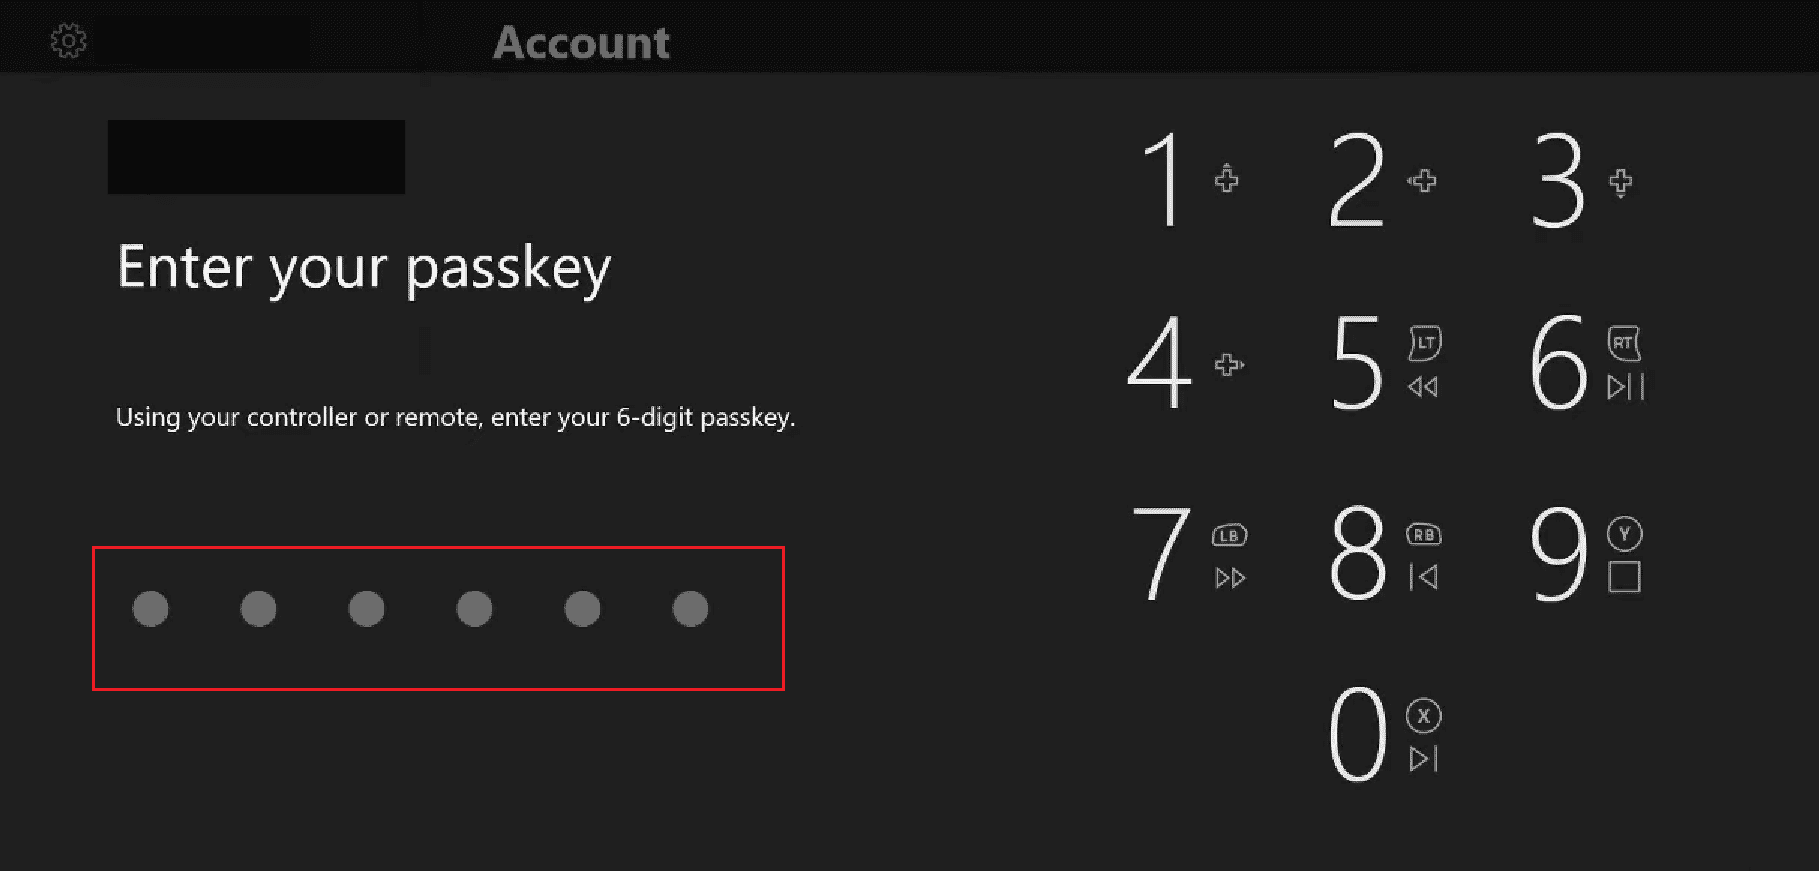 enter your 6-digit passkey